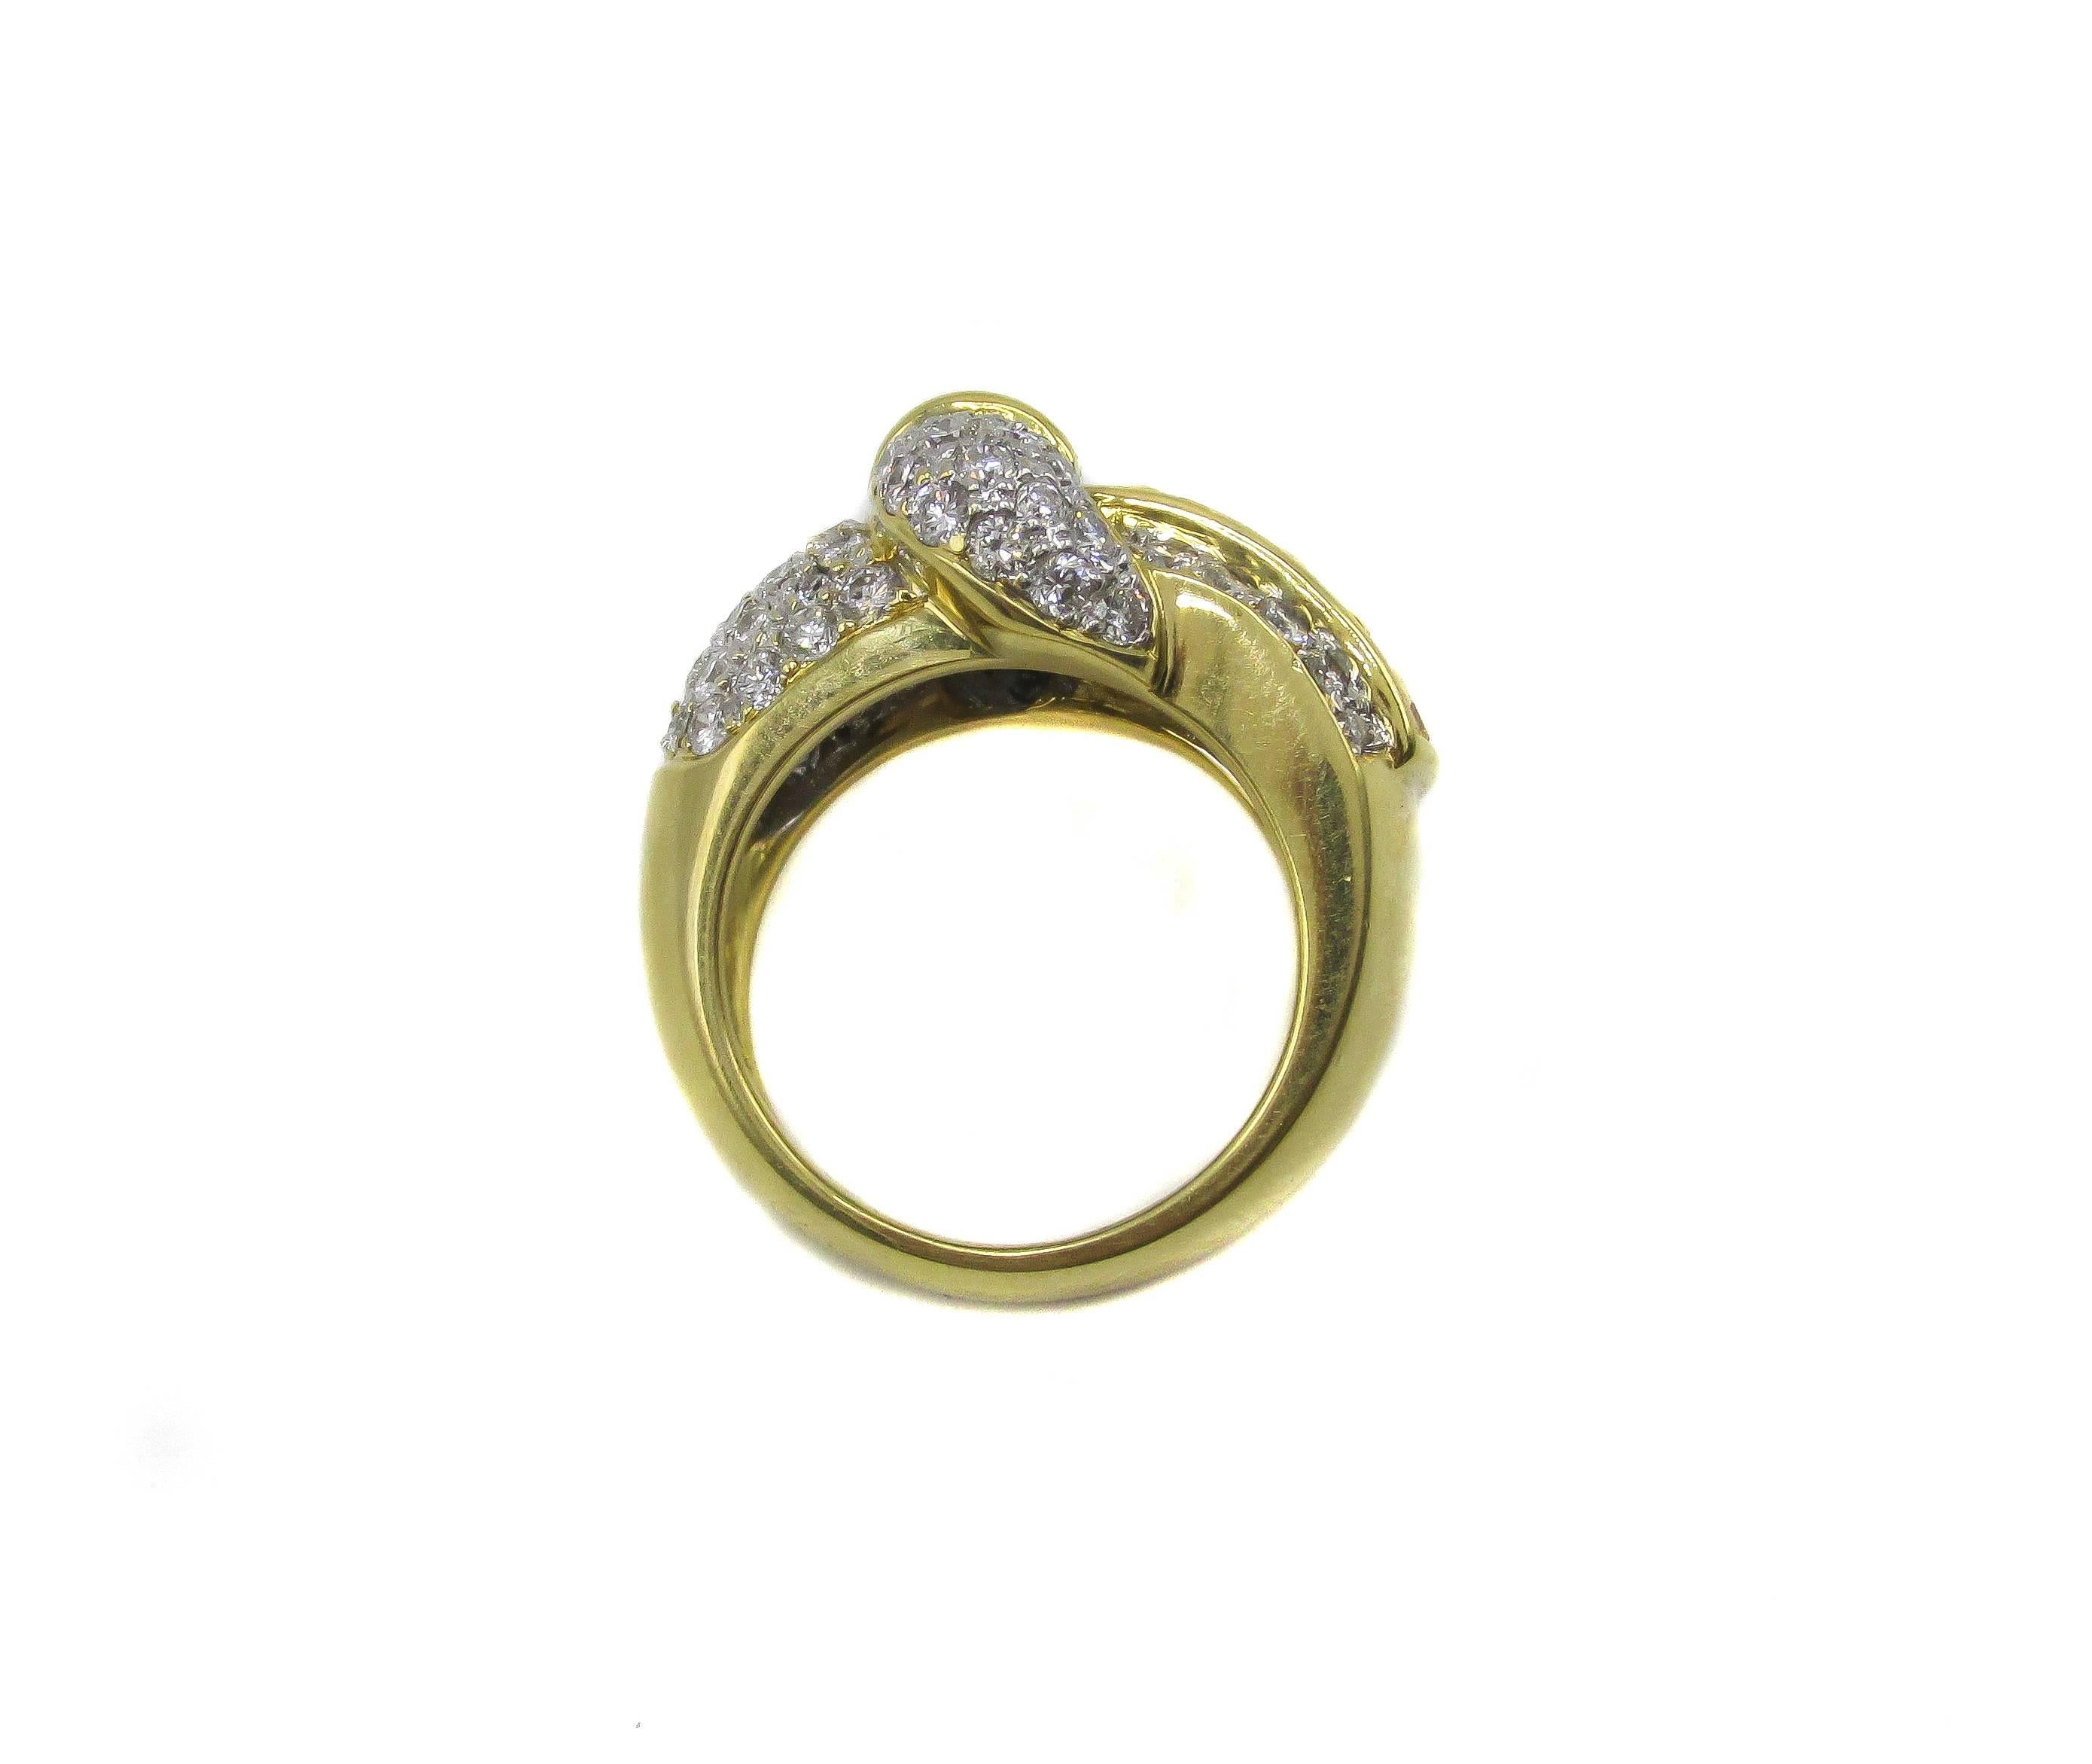 Stunning 18 karat yellow gold diamond and yellow sapphire ring designed as a belt buckle. This amazingly crafted ring is pave set with 79 round brilliant cut diamonds and 4 channel set baguette cut diamonds. 18 vivid orangey yellow square emerald